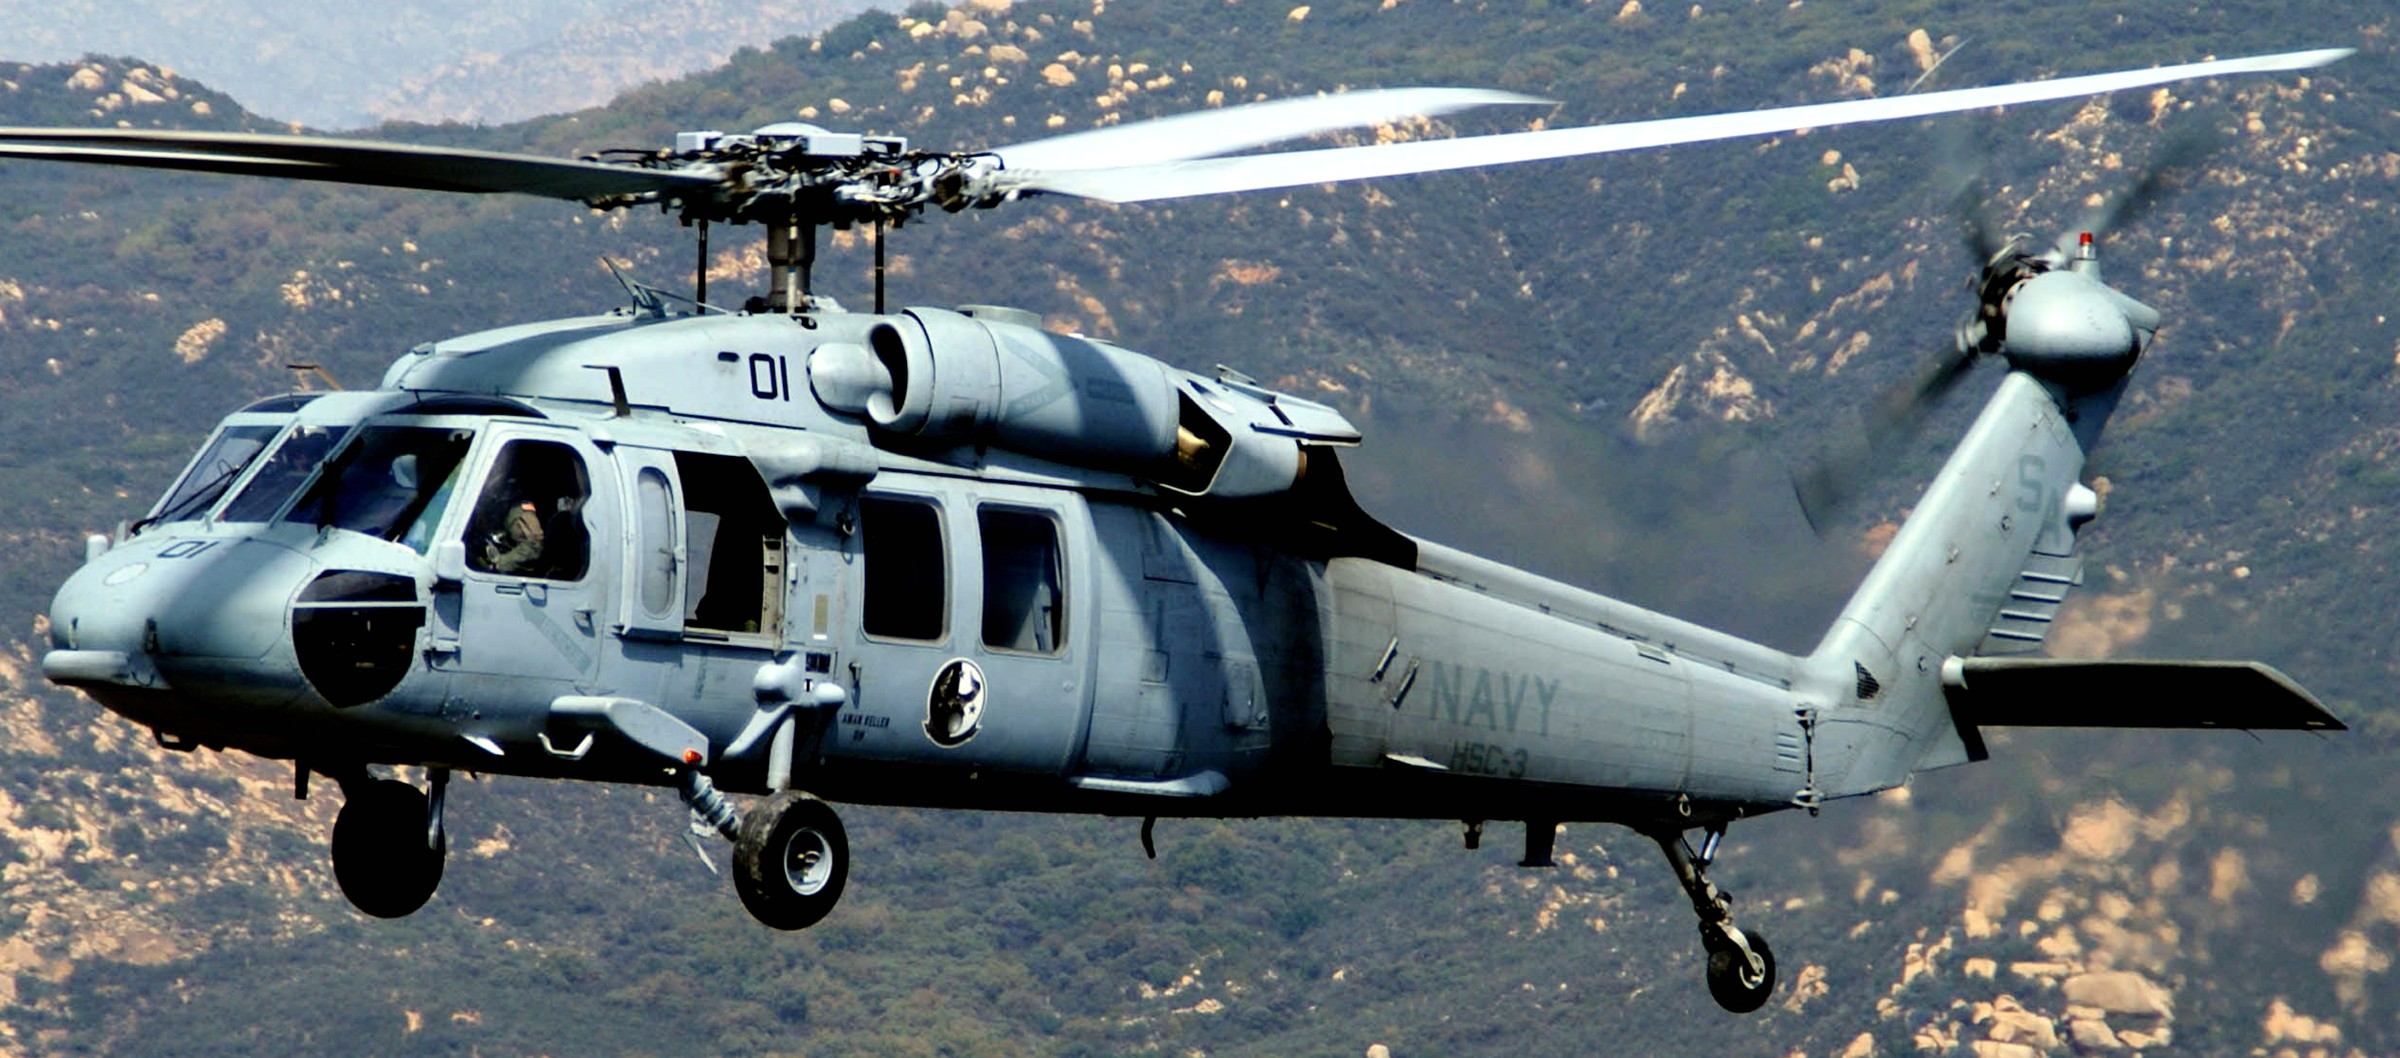 hsc-3 merlins helicopter sea combat squadron mh-60s seahawk us navy 2007 35